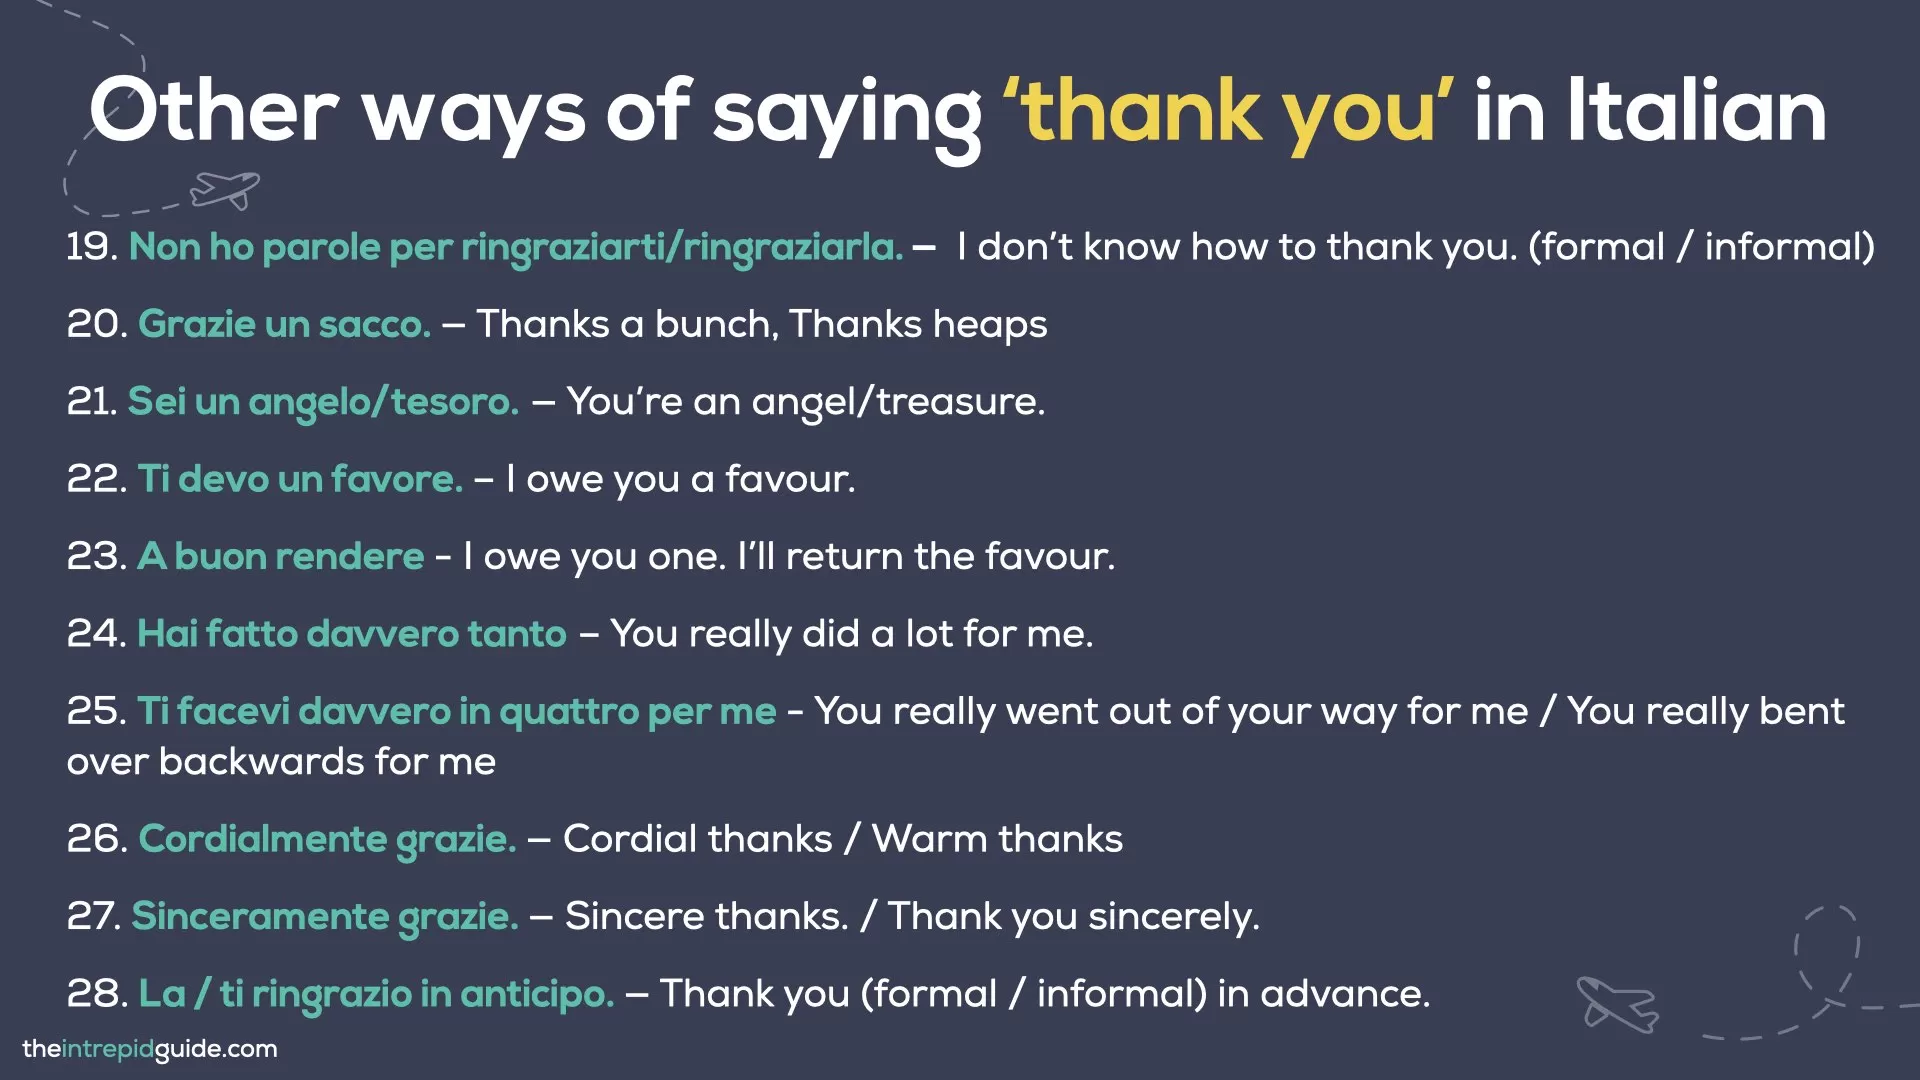 How to say thank you in Italian - grazie un sacco, a buon rendere